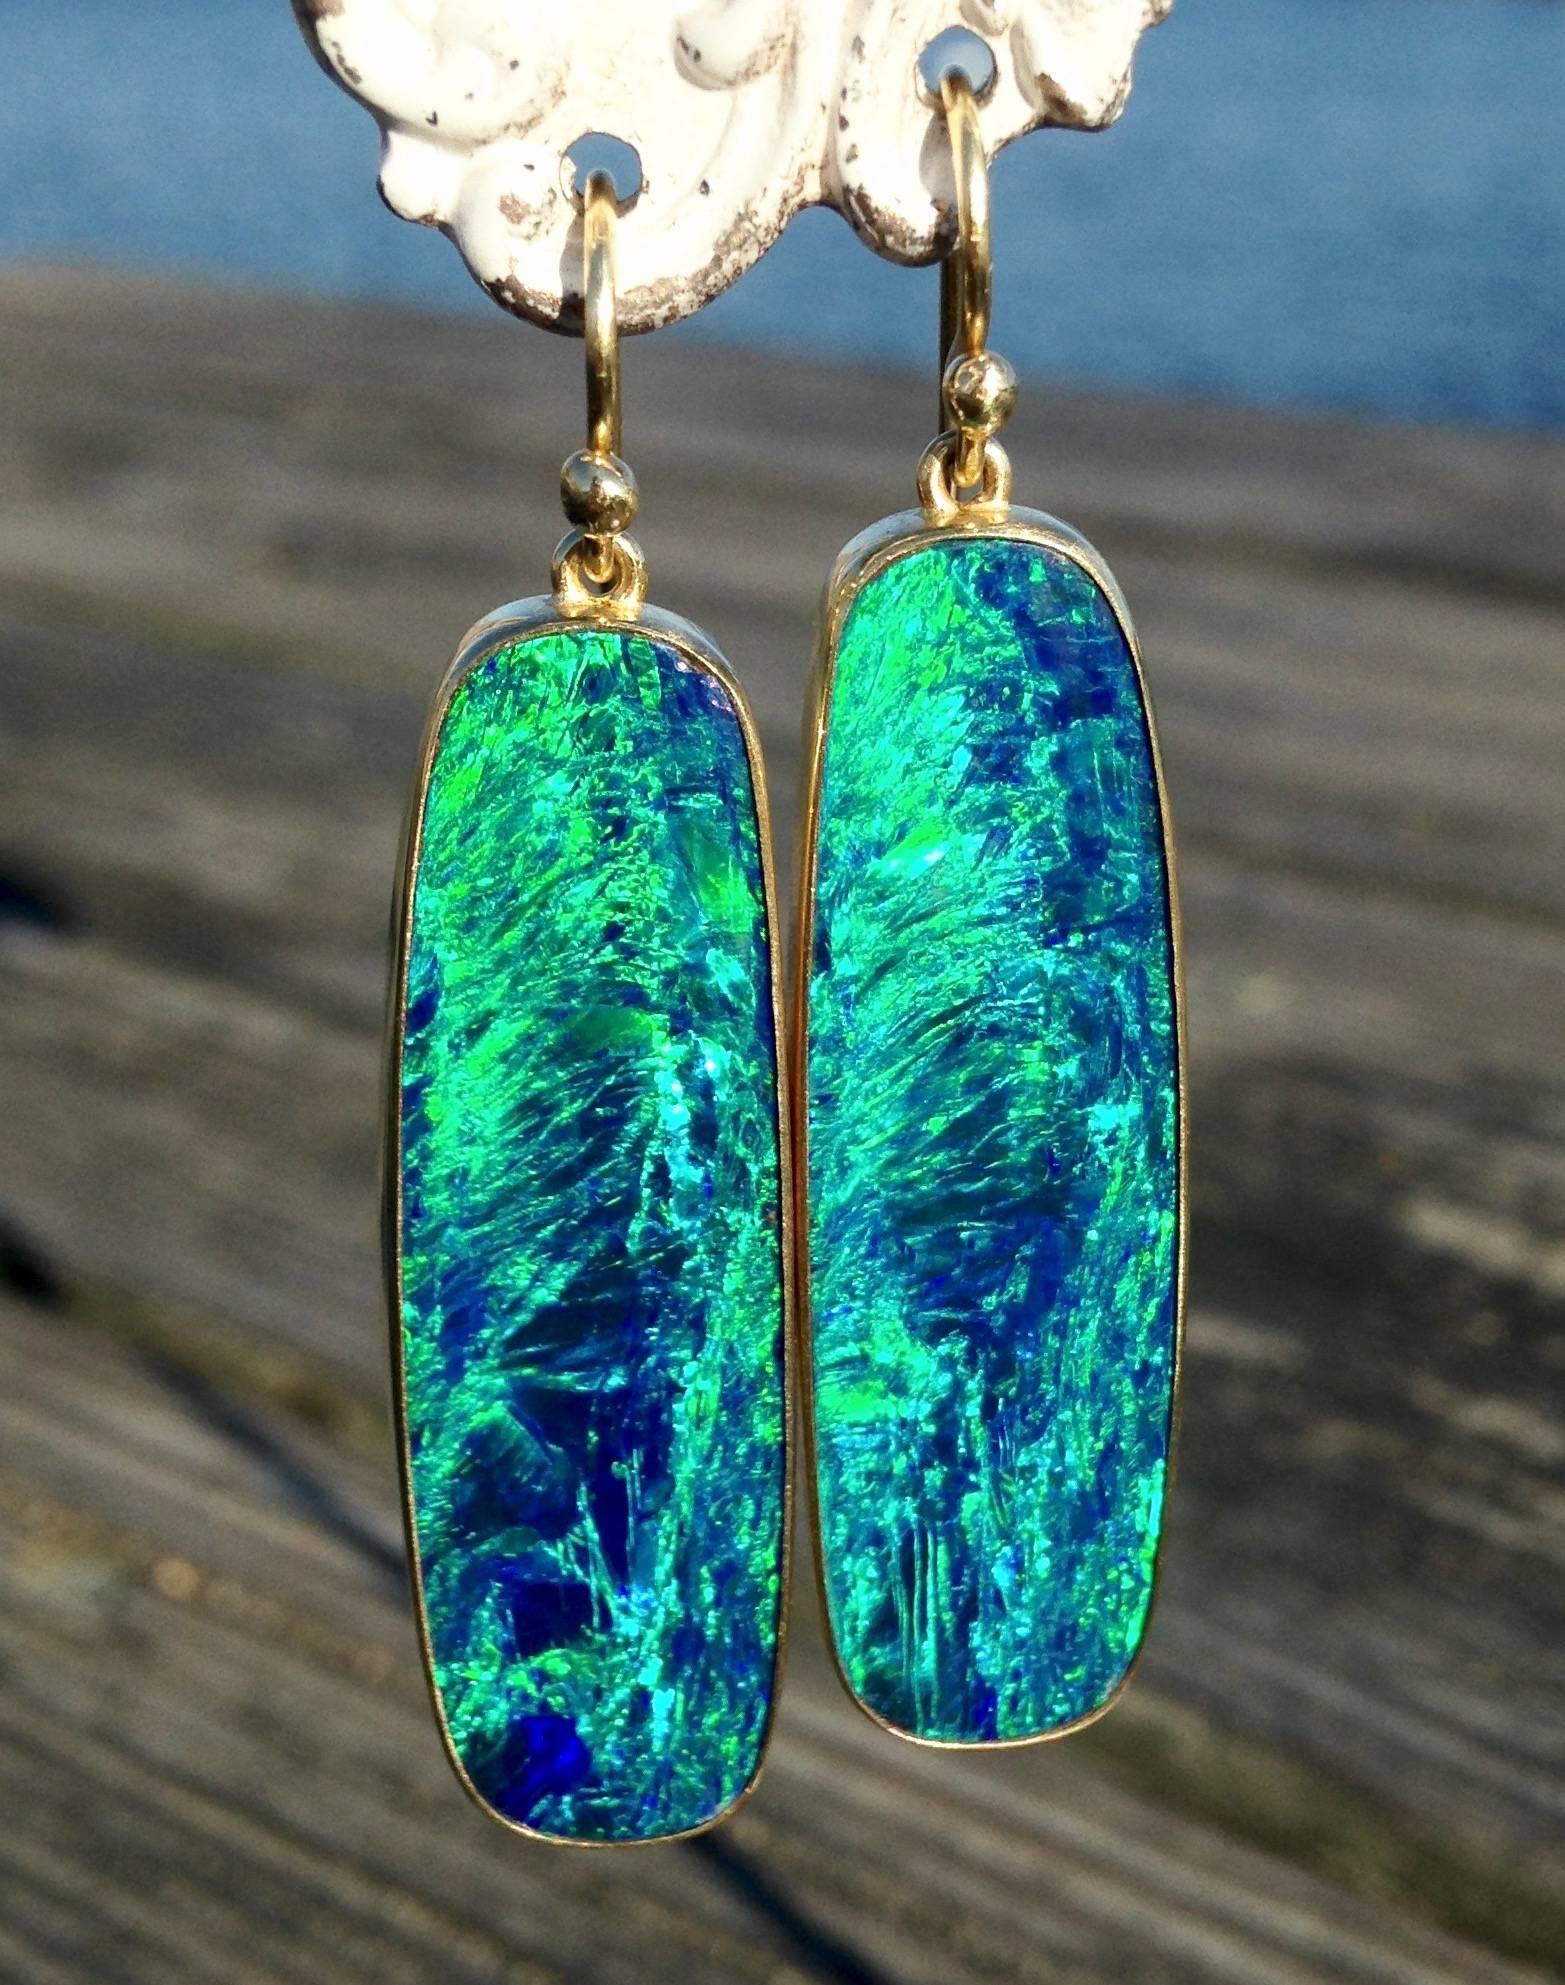 Continuing her work with Australian Boulder Opals, Susan saw these doublet Australian Boulder Opals and created her 